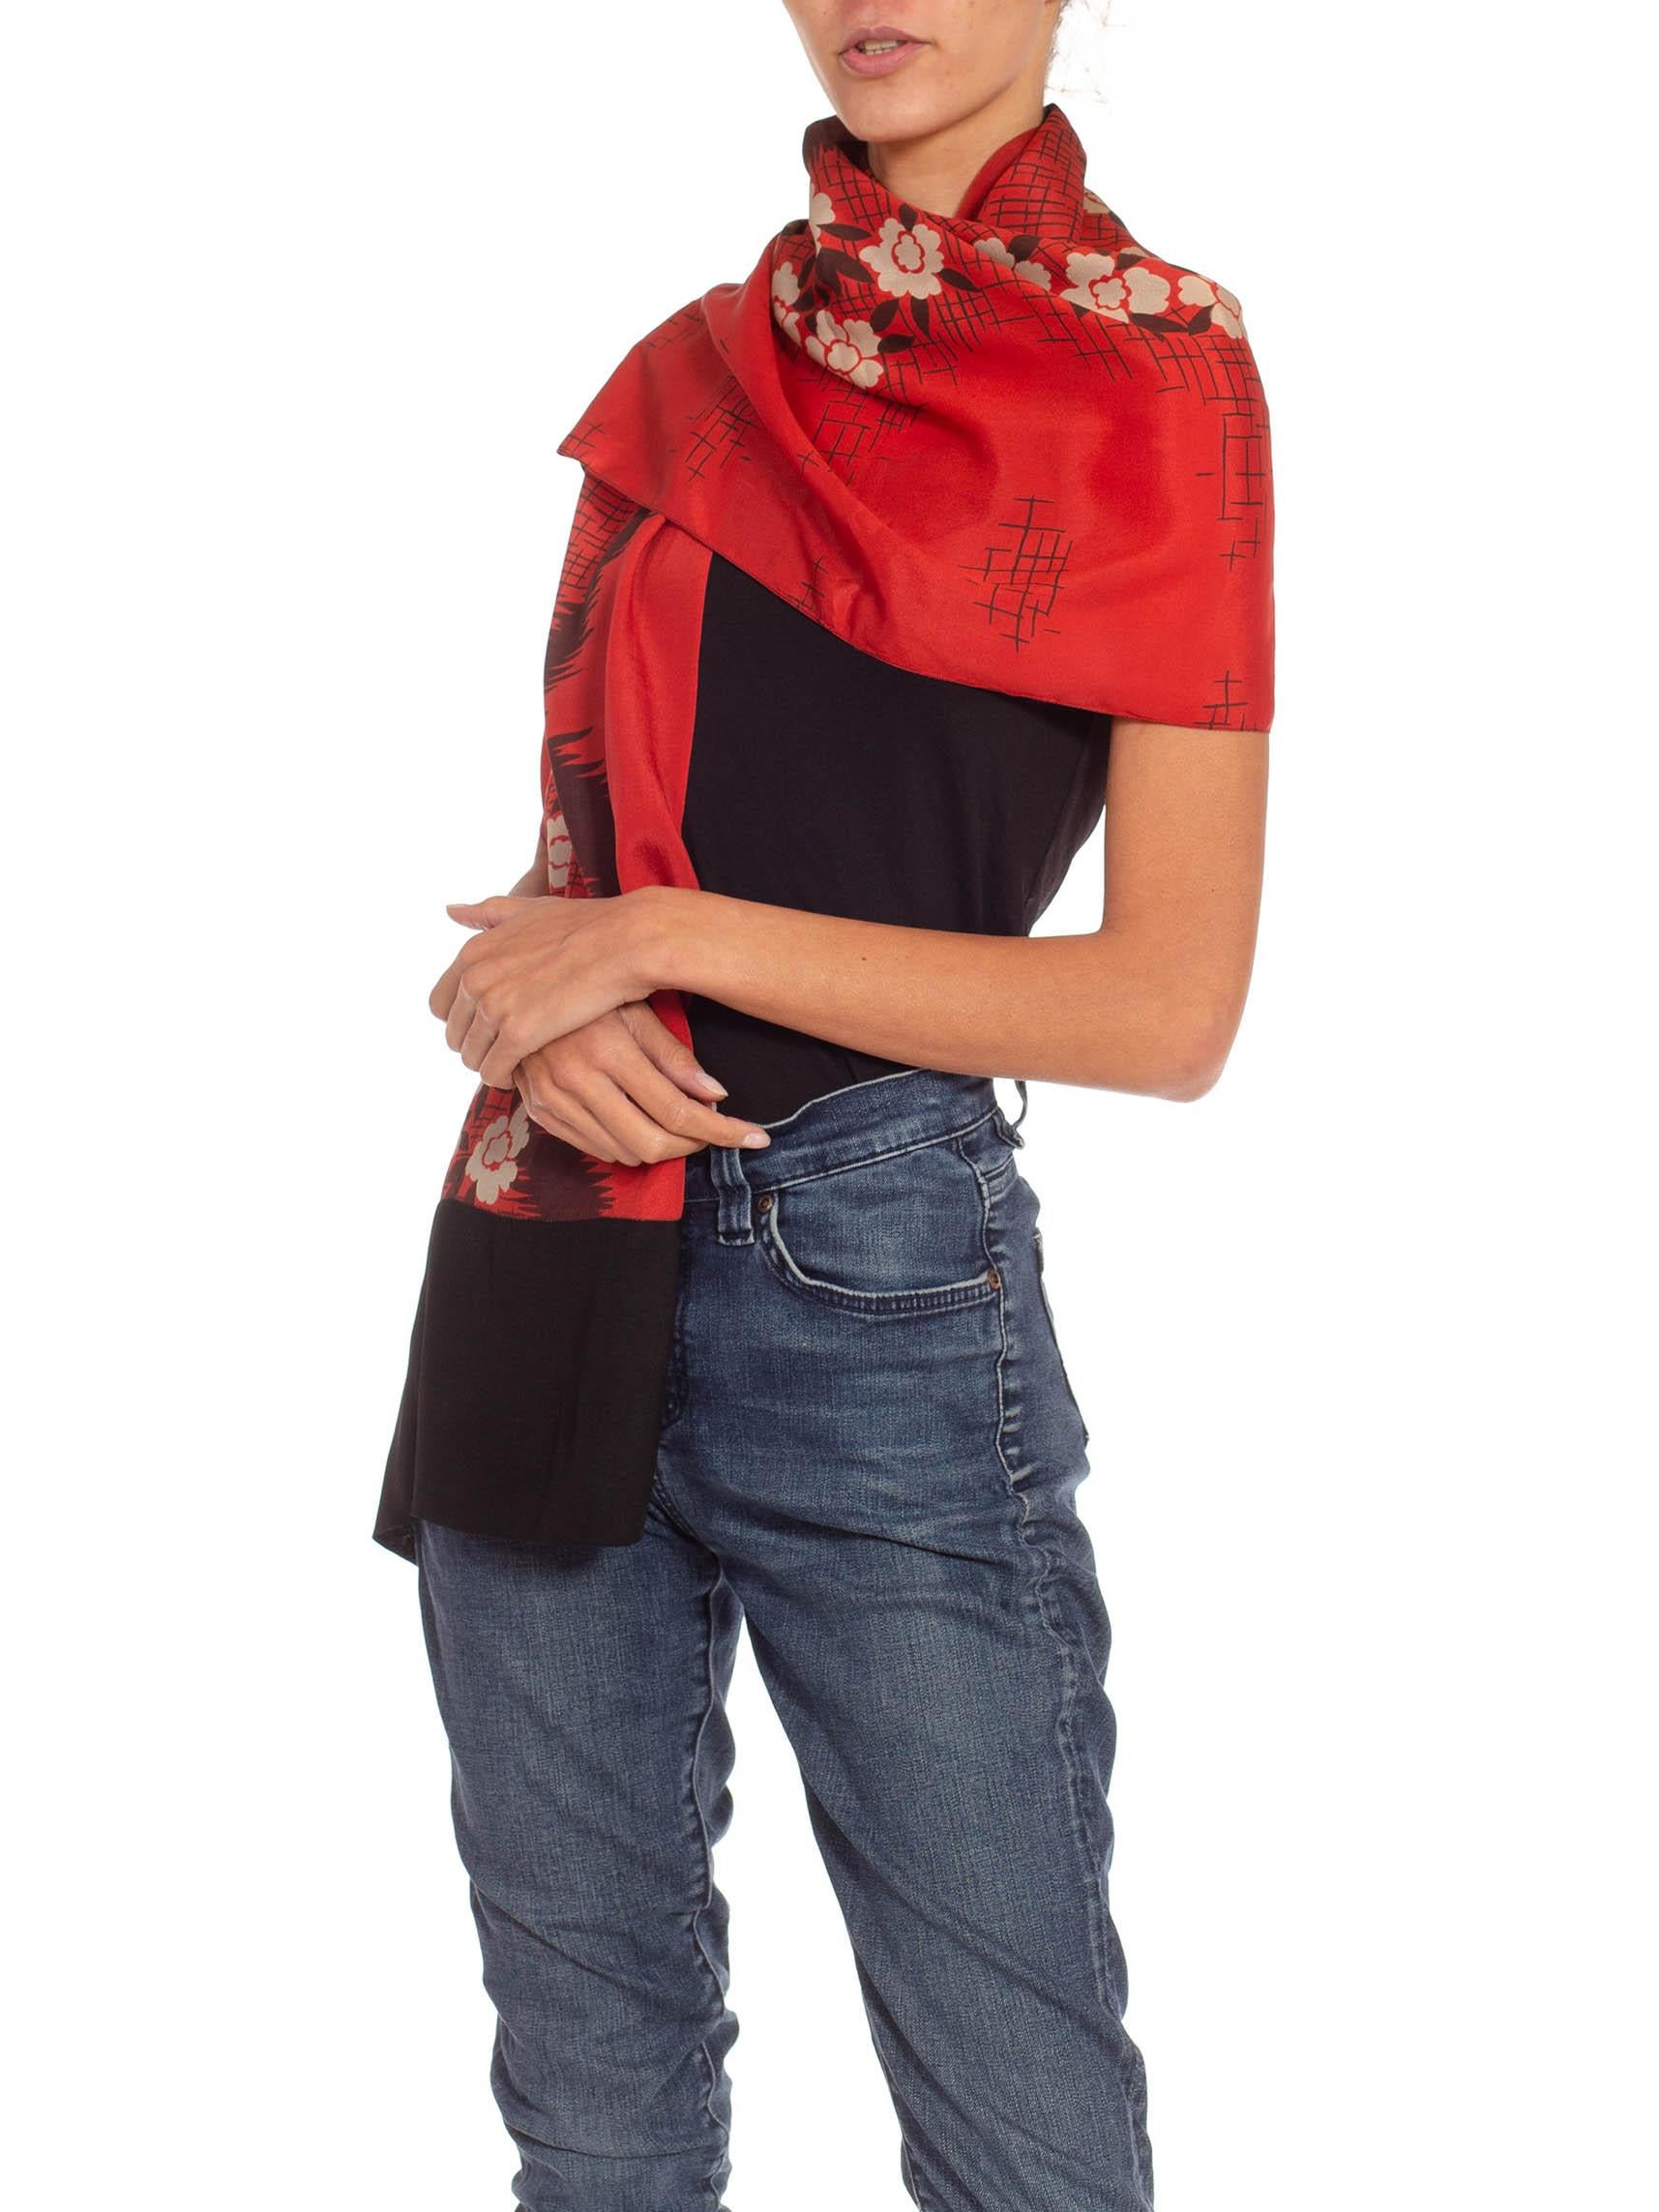 red and black silk scarf